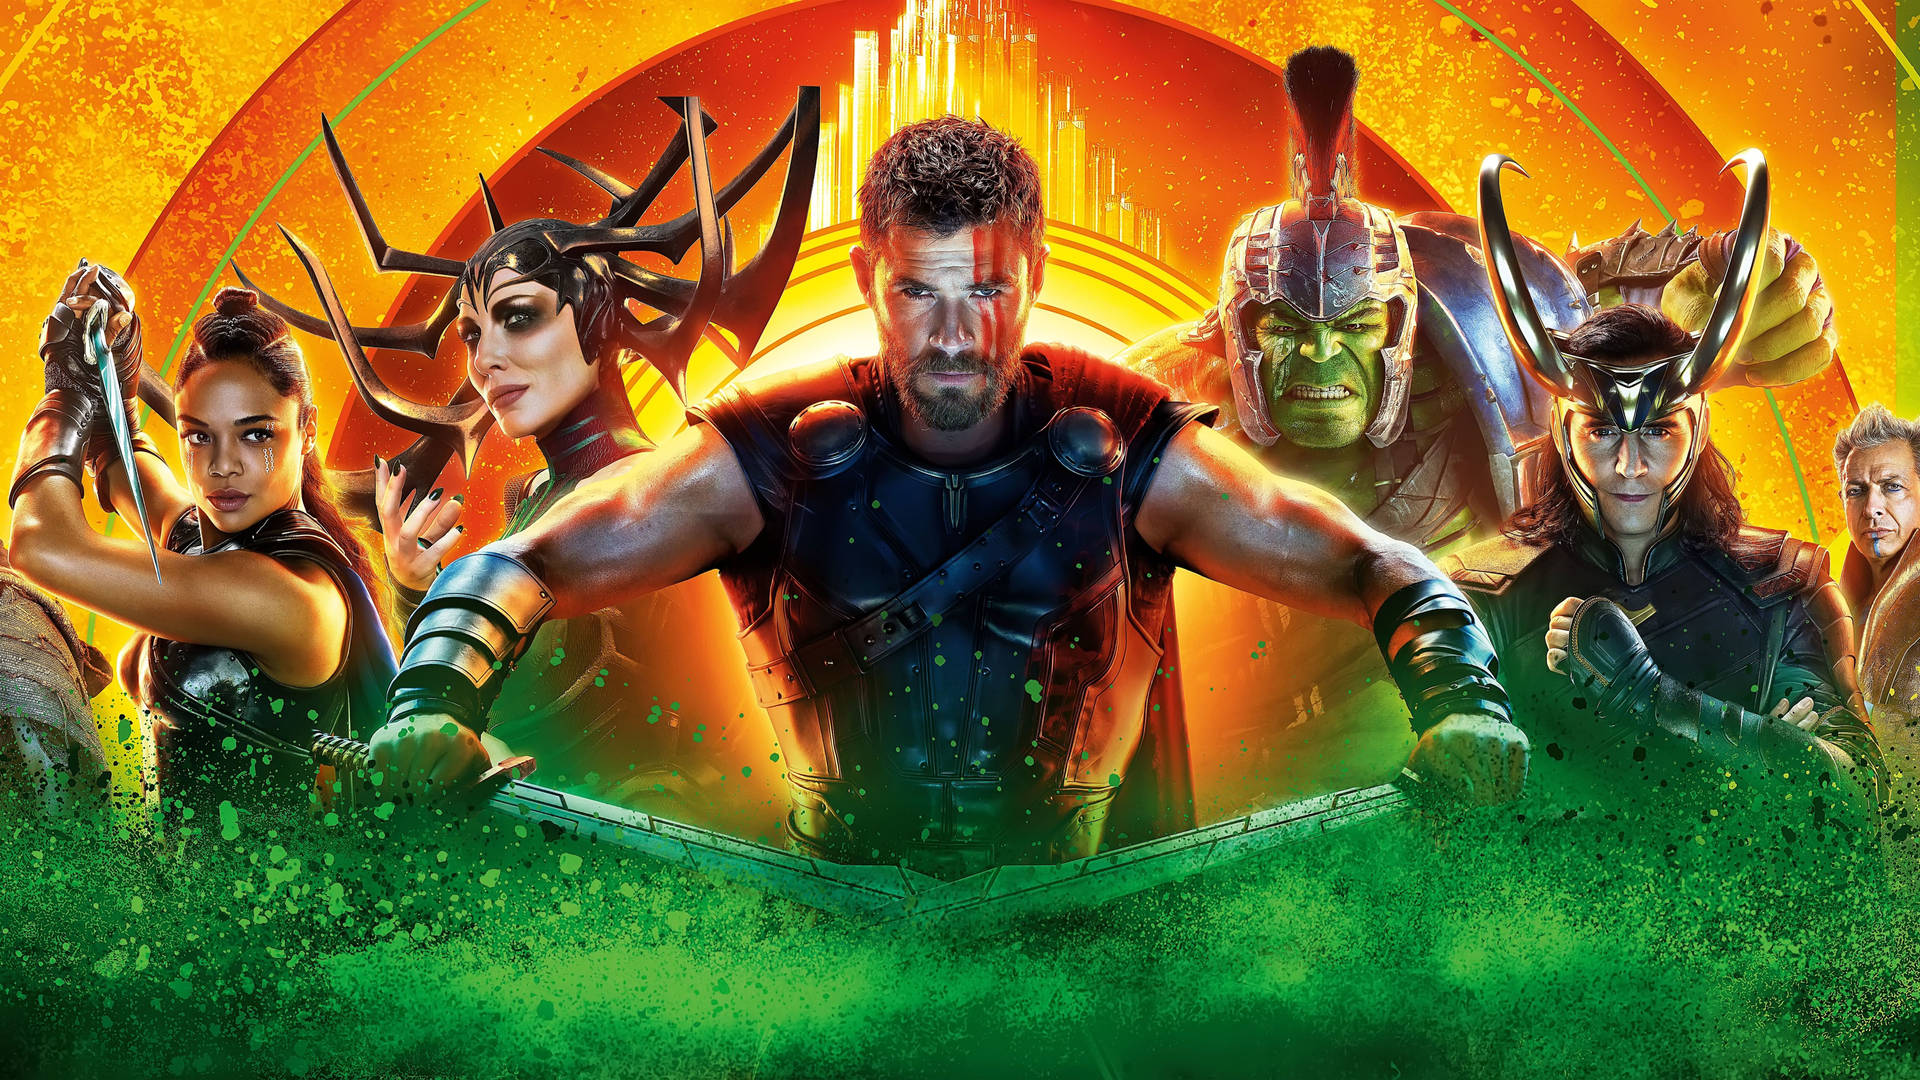 Thor gears up for Ragnarok in the all-star 2017 movie Wallpaper